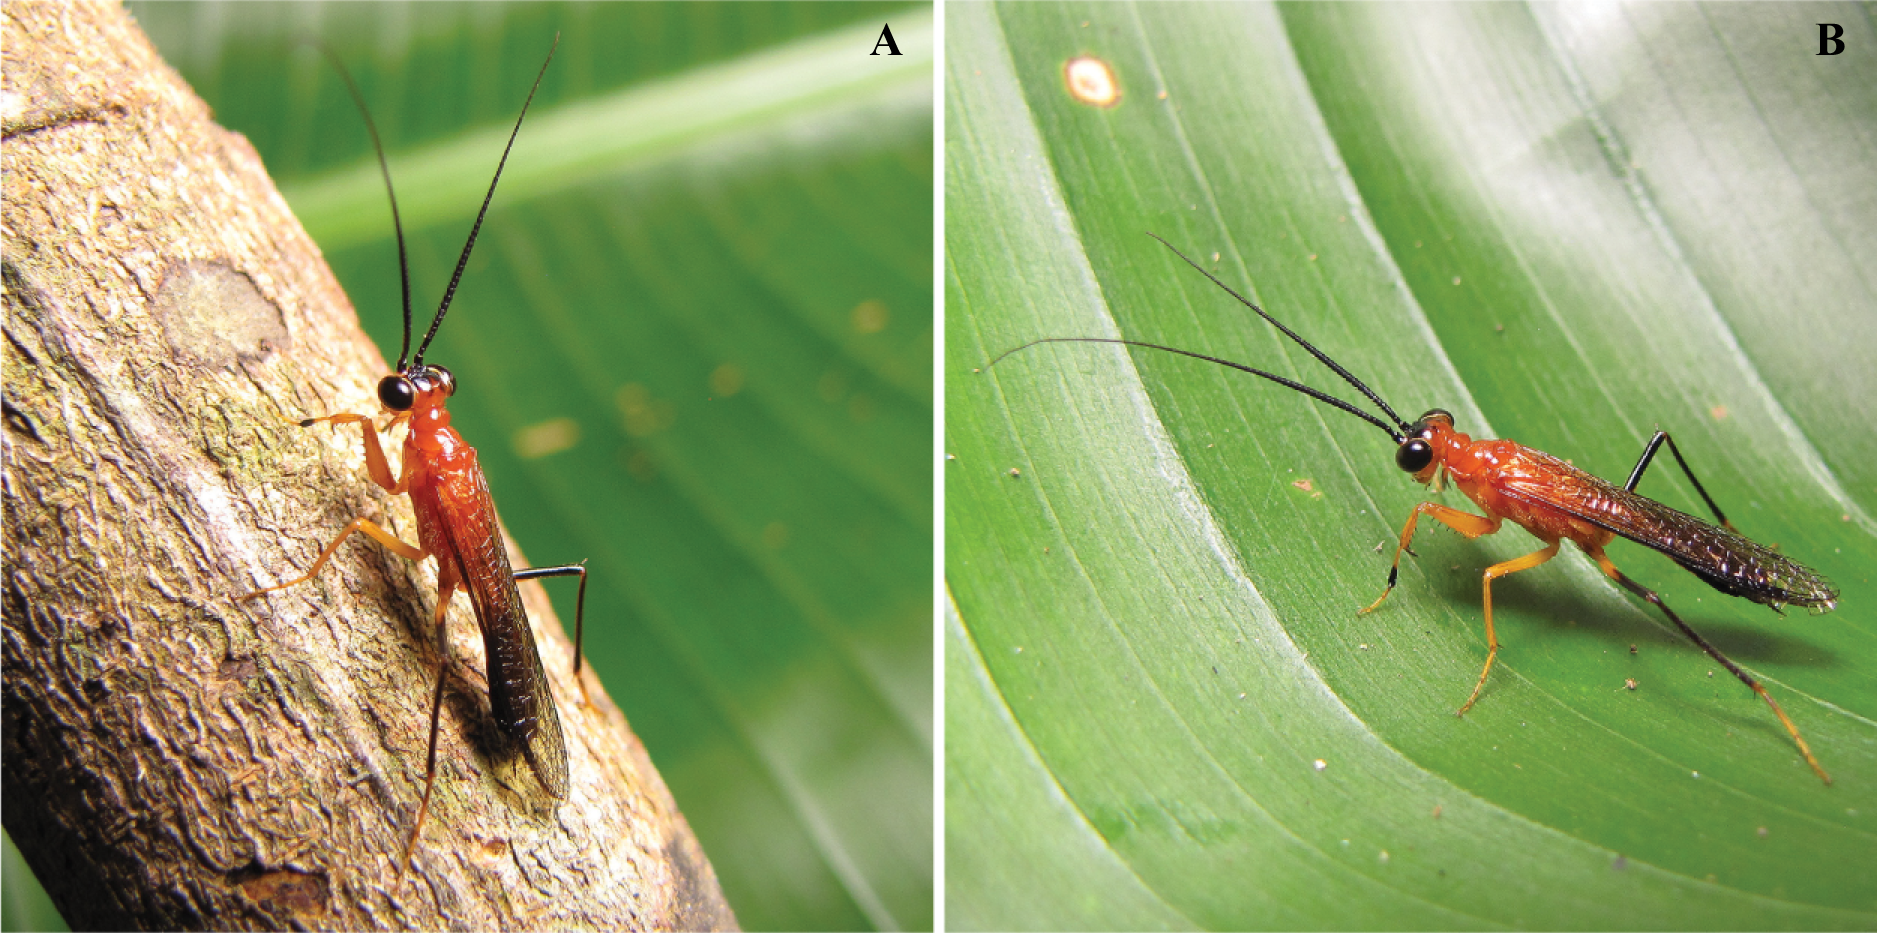 A novel form of wasp mimicry in a new species of praying mantis from the Amazon rainforest, Vespamantoida wherleyi gen. nov. sp